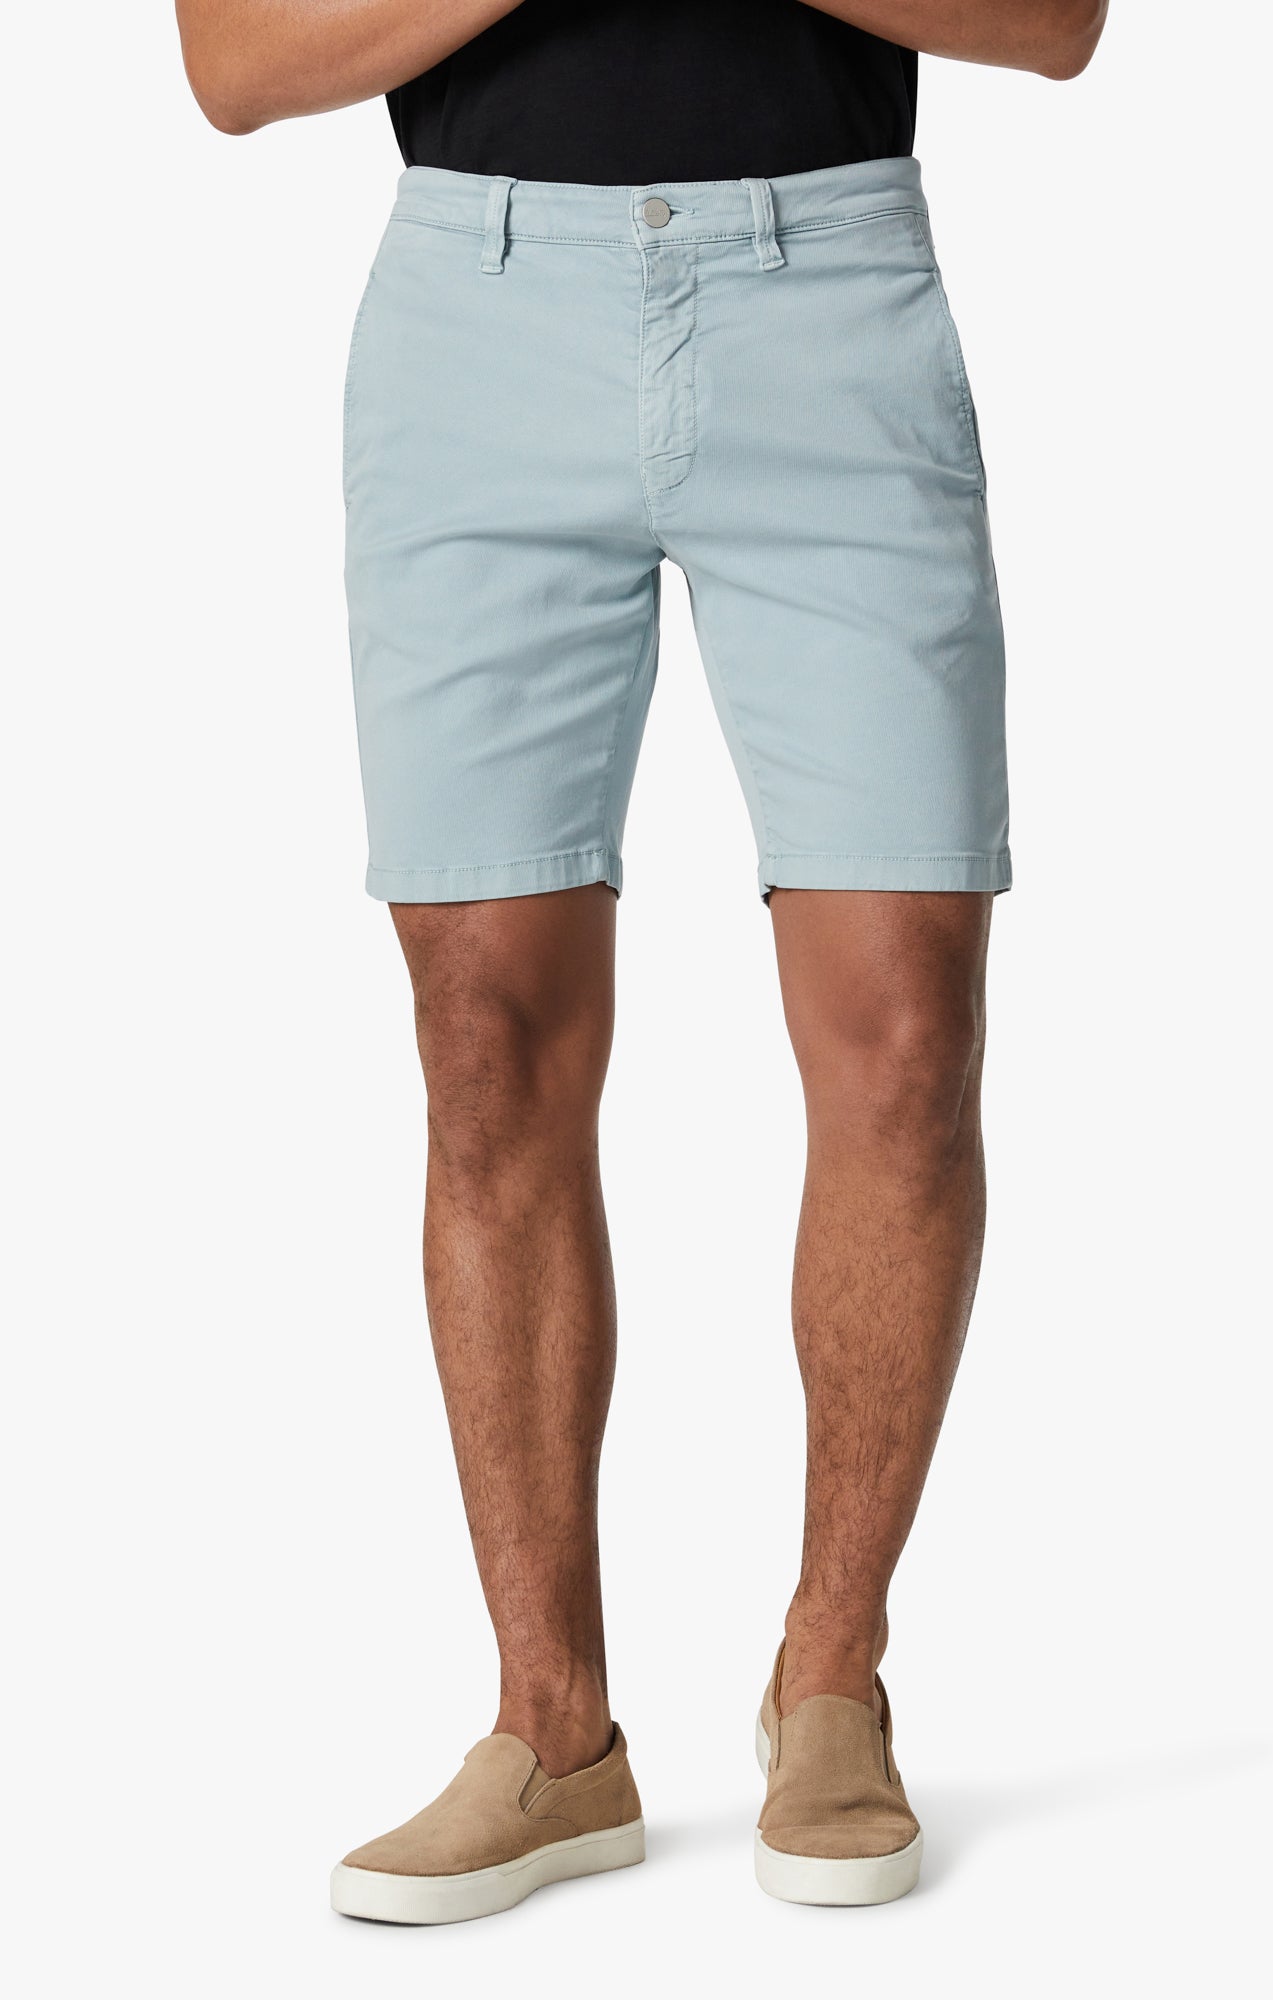 Nevada Shorts in Light Blue Soft Touch Image 2